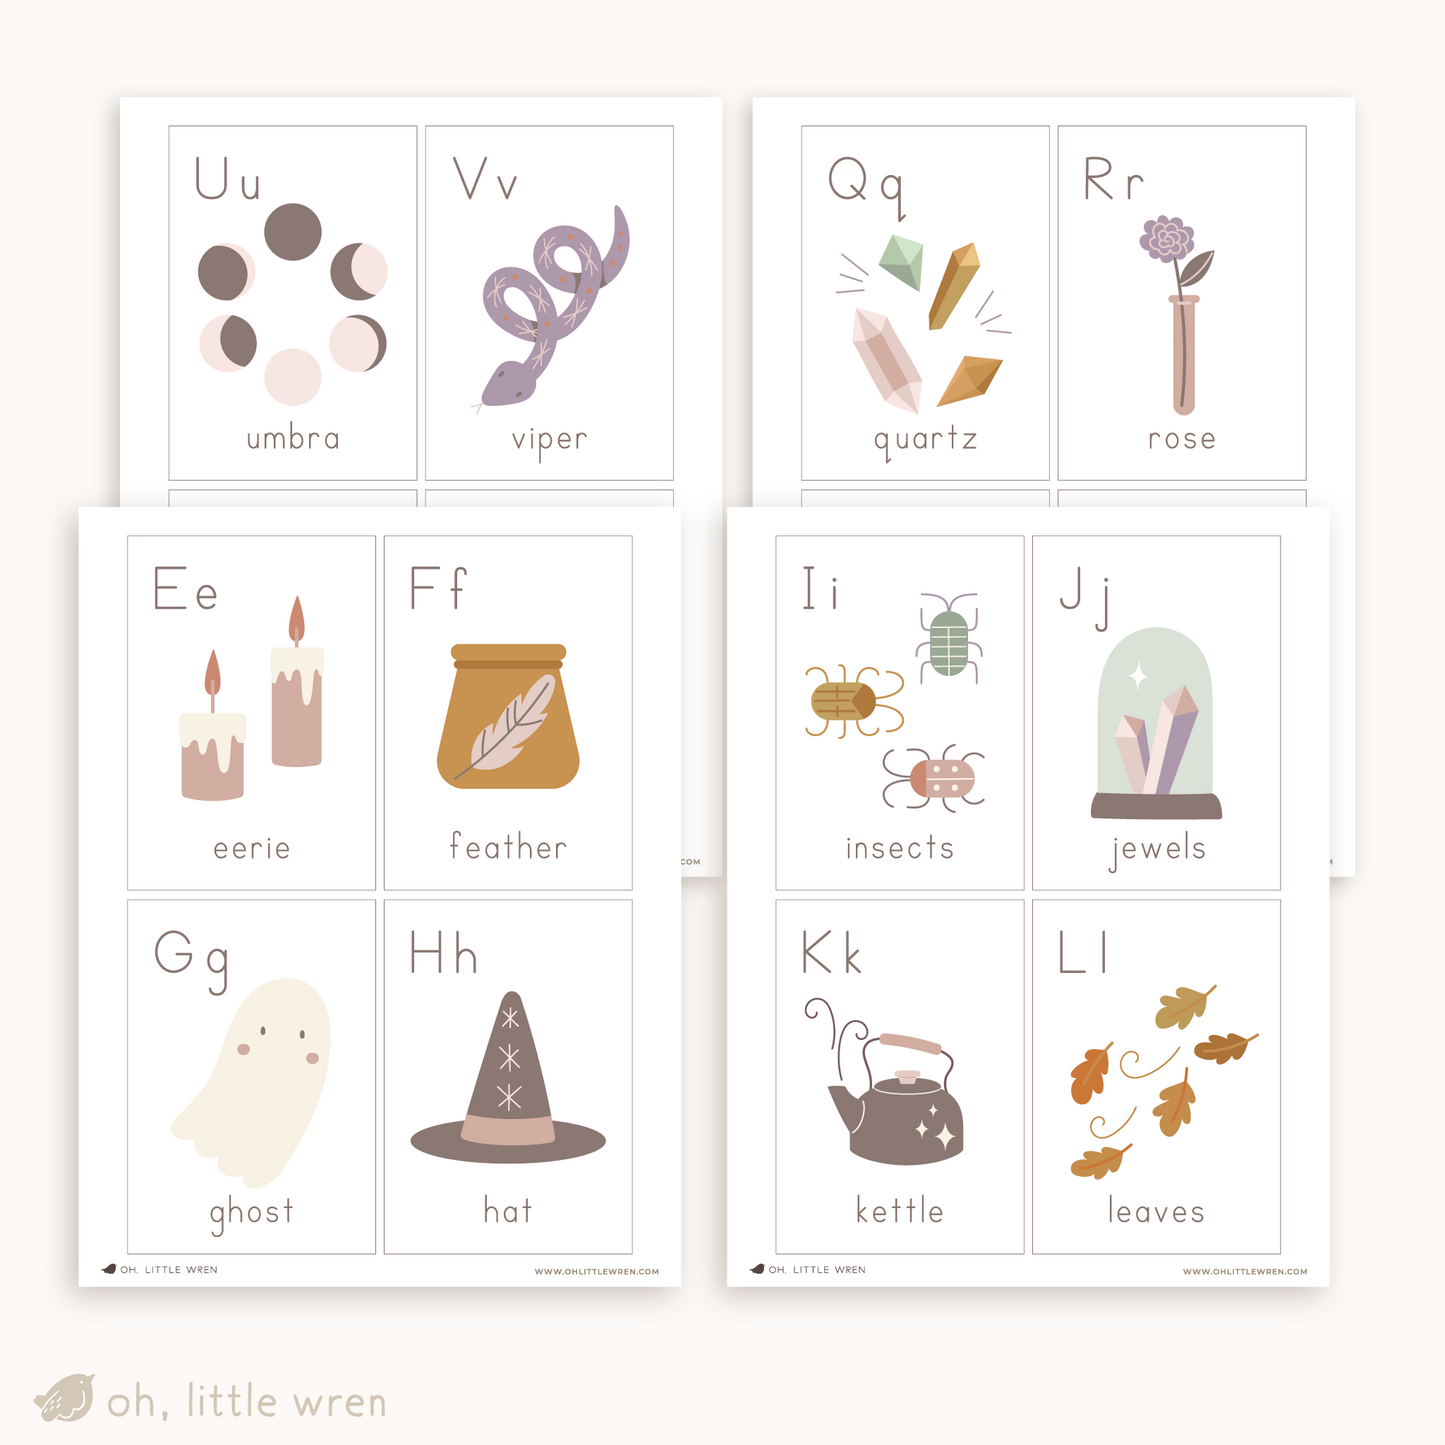 pages of abc flashcards with a halloween theme. visible are u for umbra, v for viper, q for quartz, r for rose, e for eerie, f for feather, g for ghost, h for hat, i for insect, j for jewels, k for kettle and l for leaves.